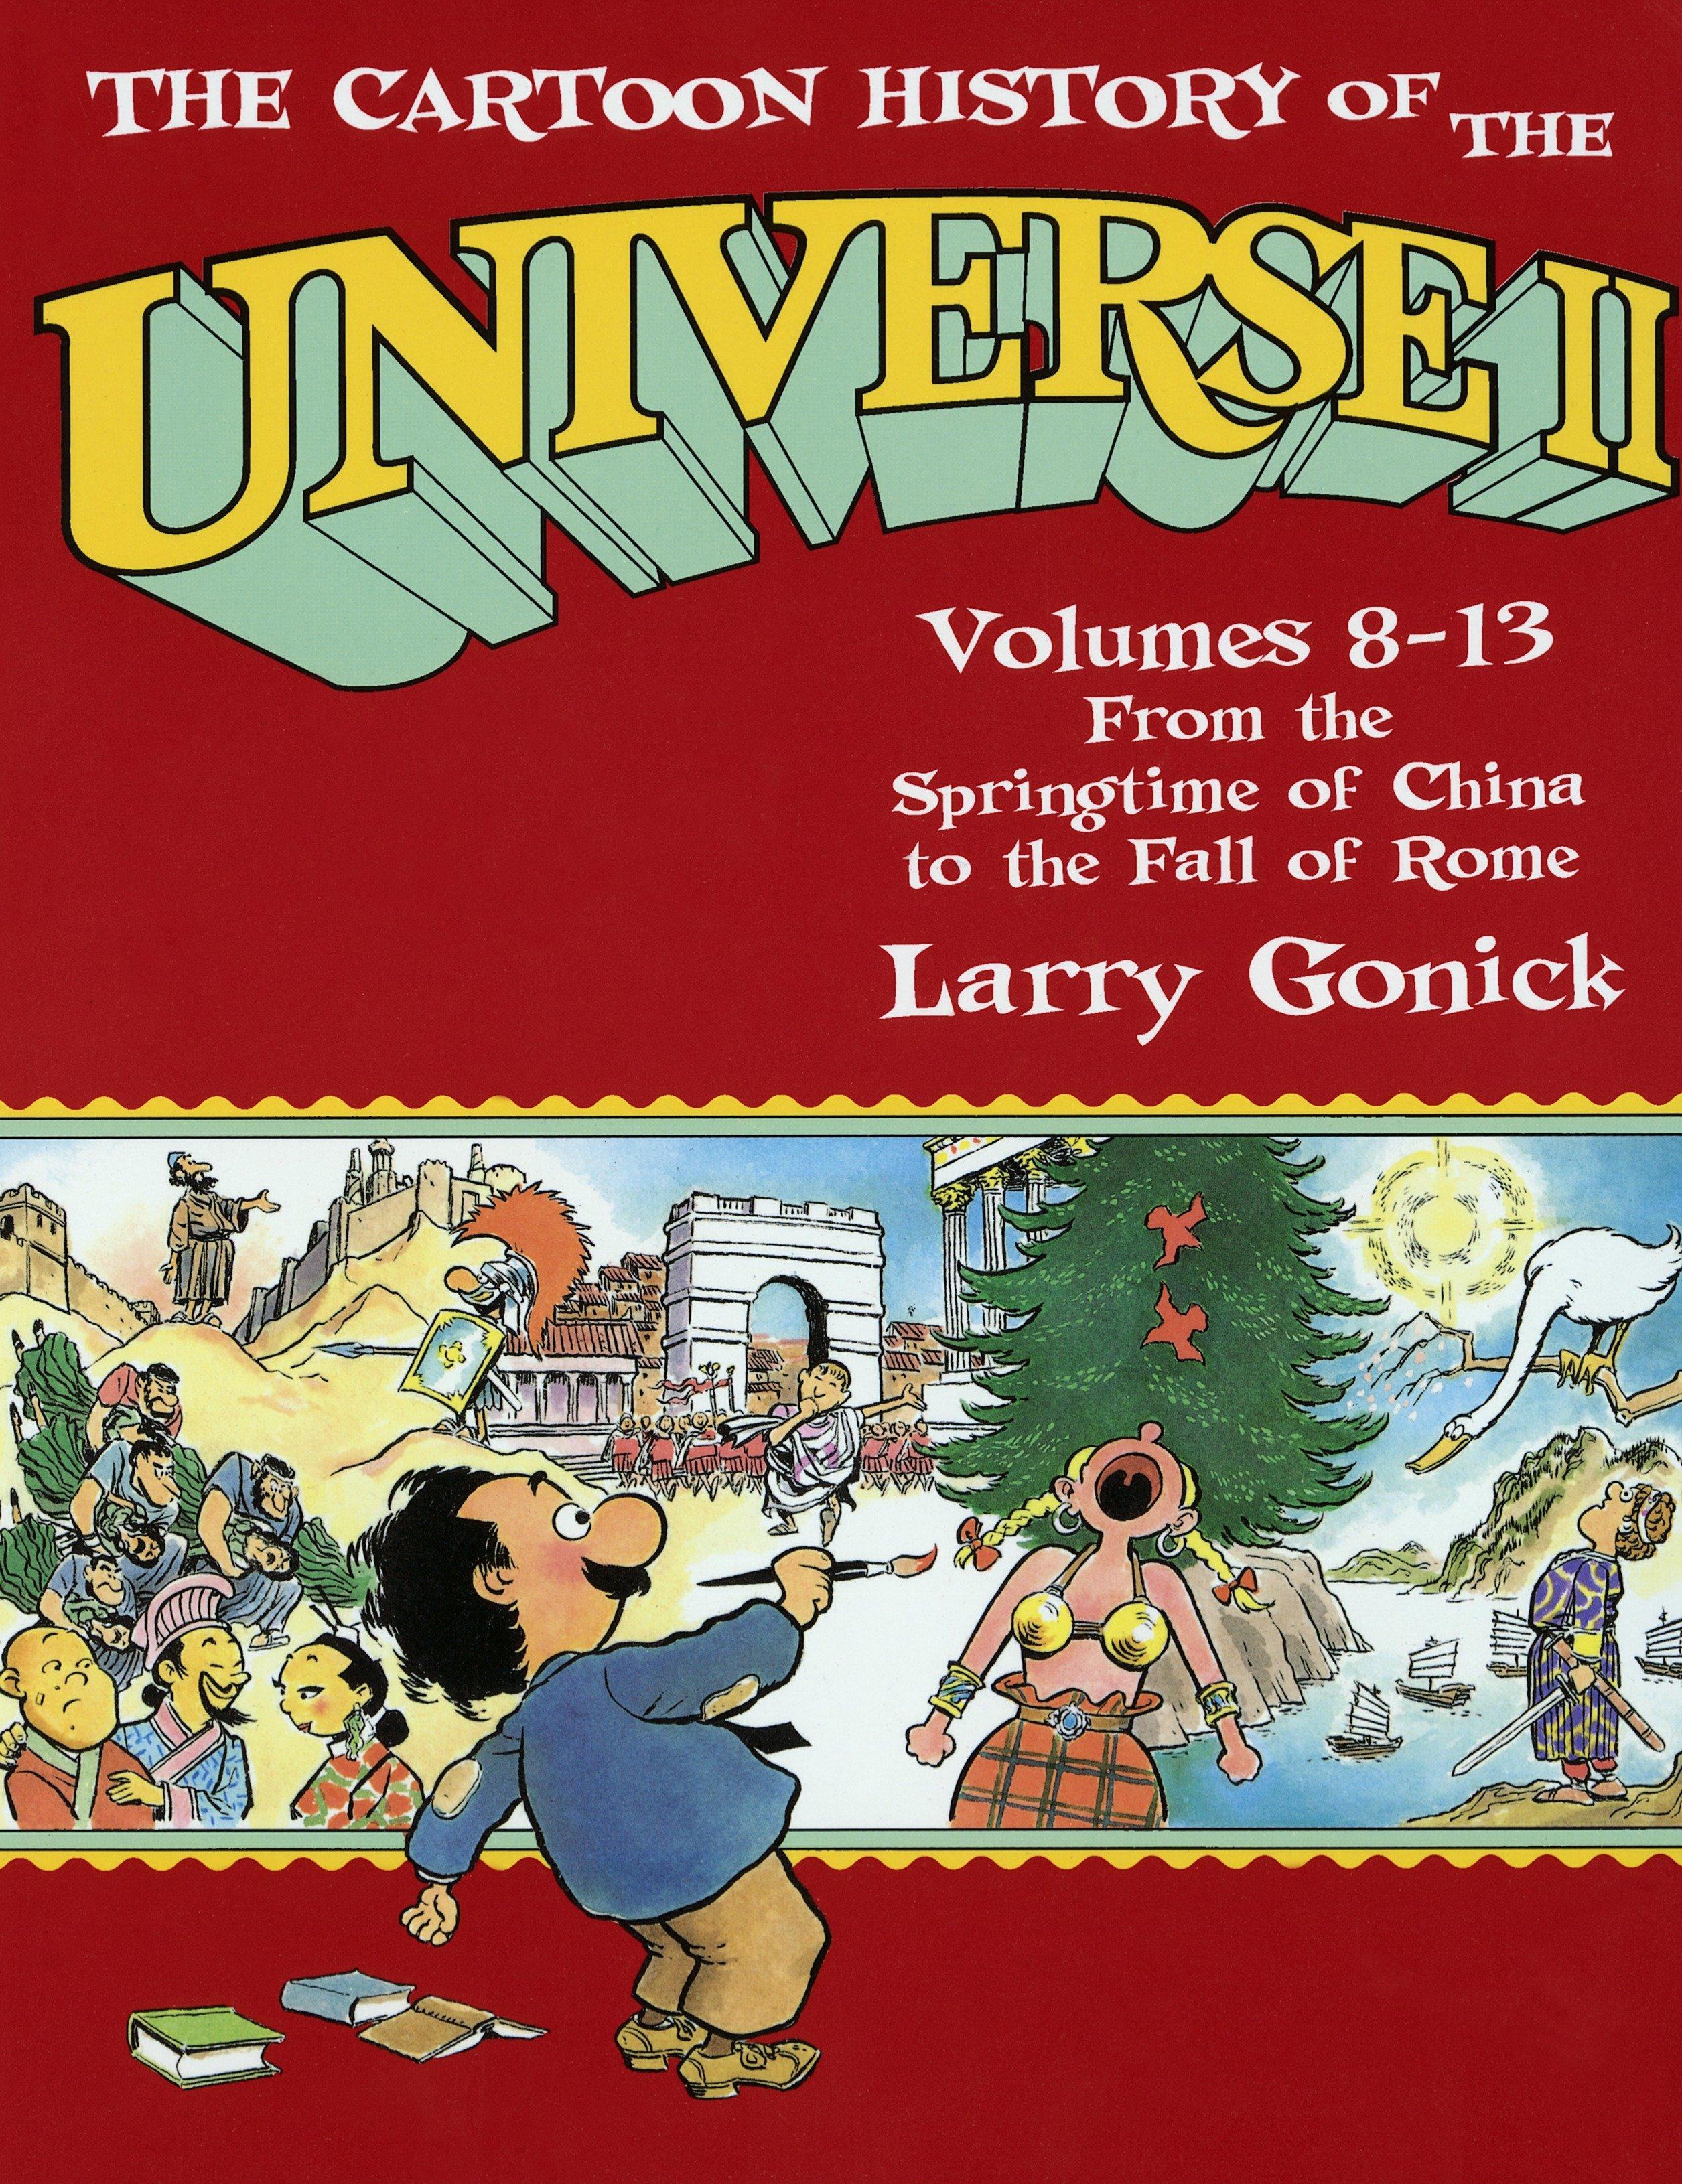 The Cartoon History of the Universe II / Volumes 8-13: From the Springtime of China to the Fall of Rome / Larry Gonick / Taschenbuch / Einband - flex.(Paperback) / Englisch / 1994 / EAN 9780385420938 - Gonick, Larry